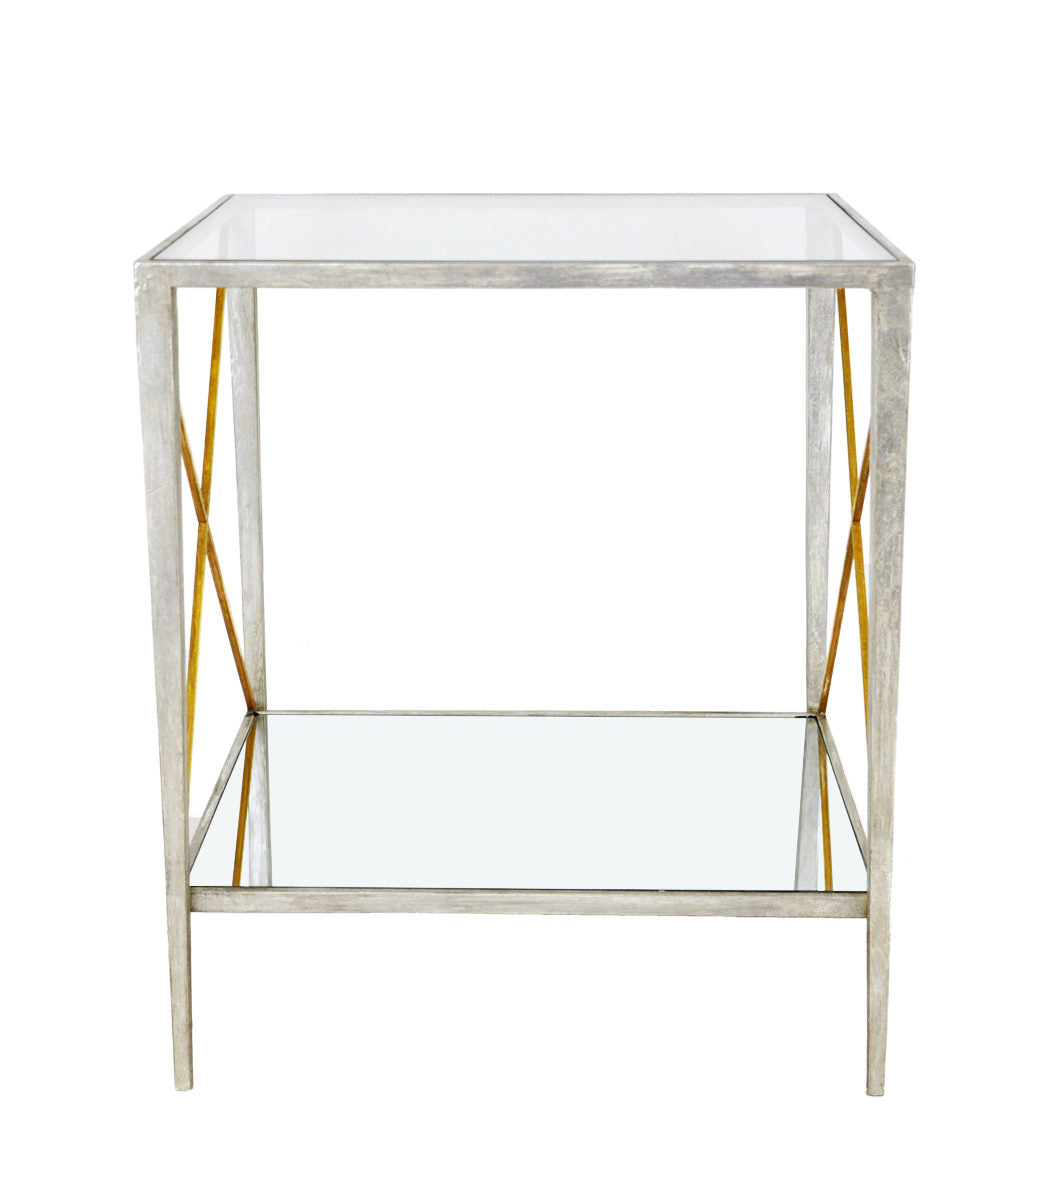 Silver and Gold Square Side Table